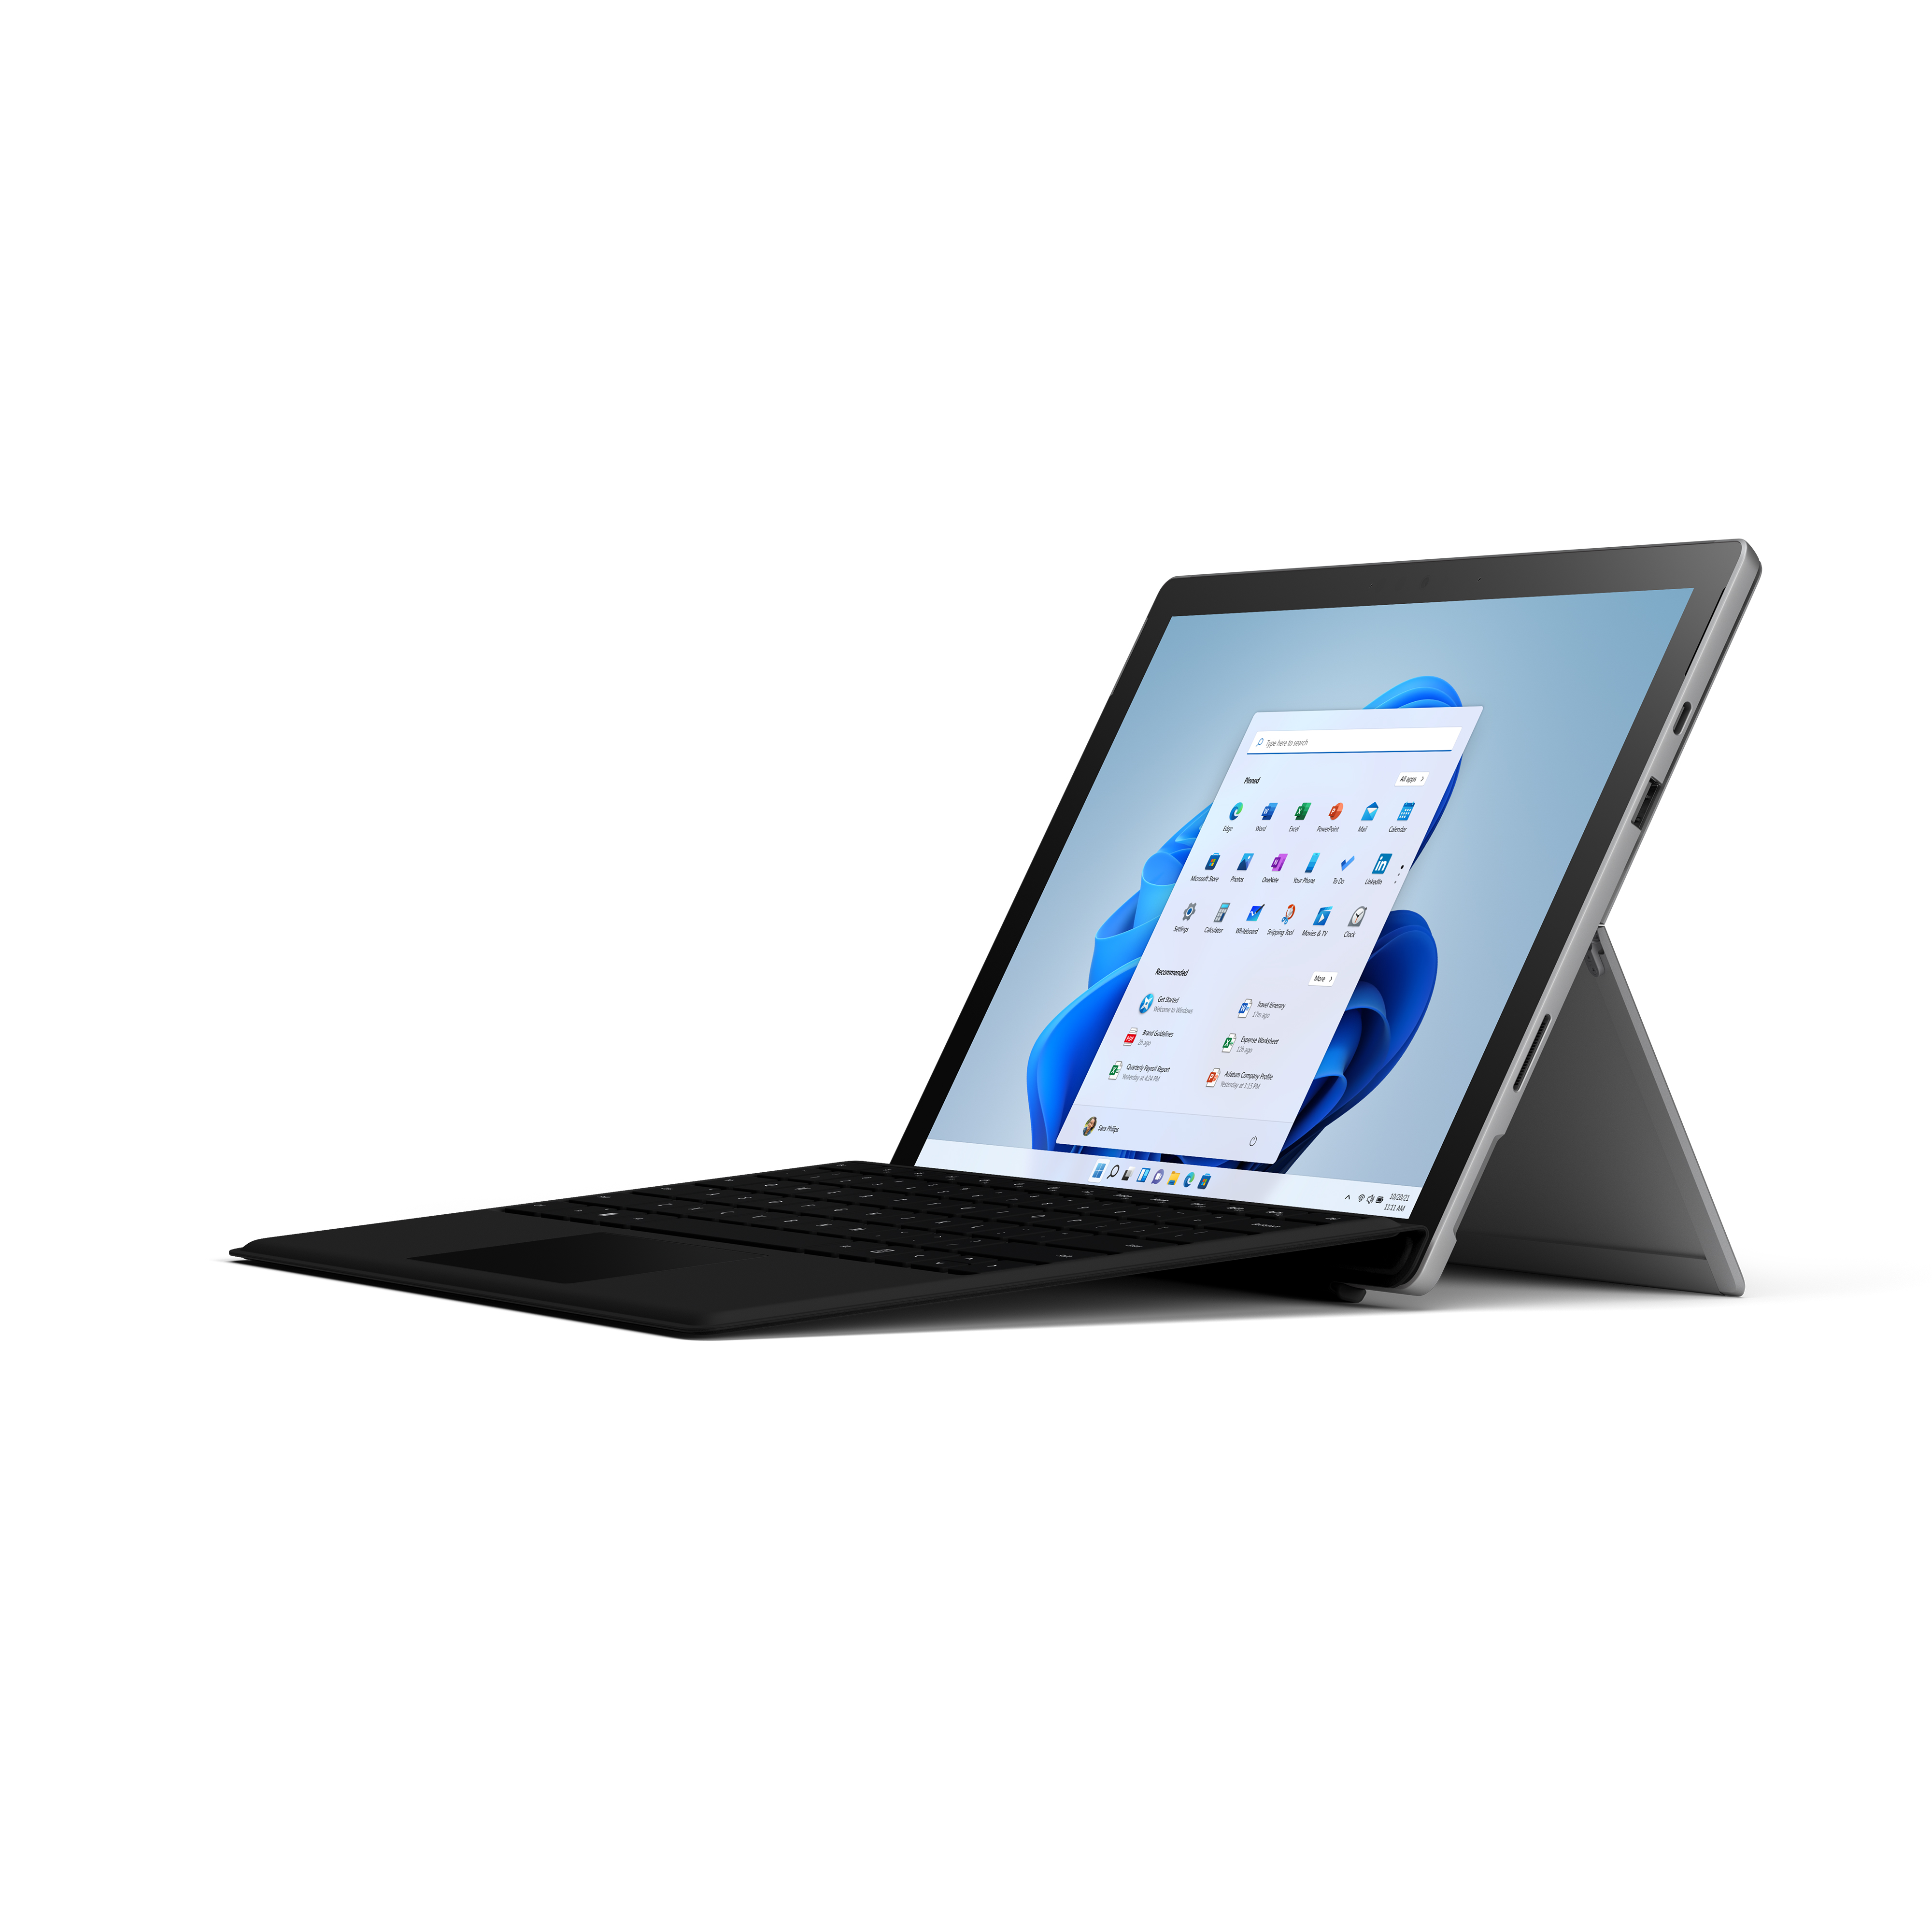 Microsoft Surface Pro 7+ 2-In-1, 12.3" Touch Screen, Intel Core i3, 8GB RAM, 128GB SSD, Windows 11 Home, Platinum, with Black Type Cover - image 1 of 8